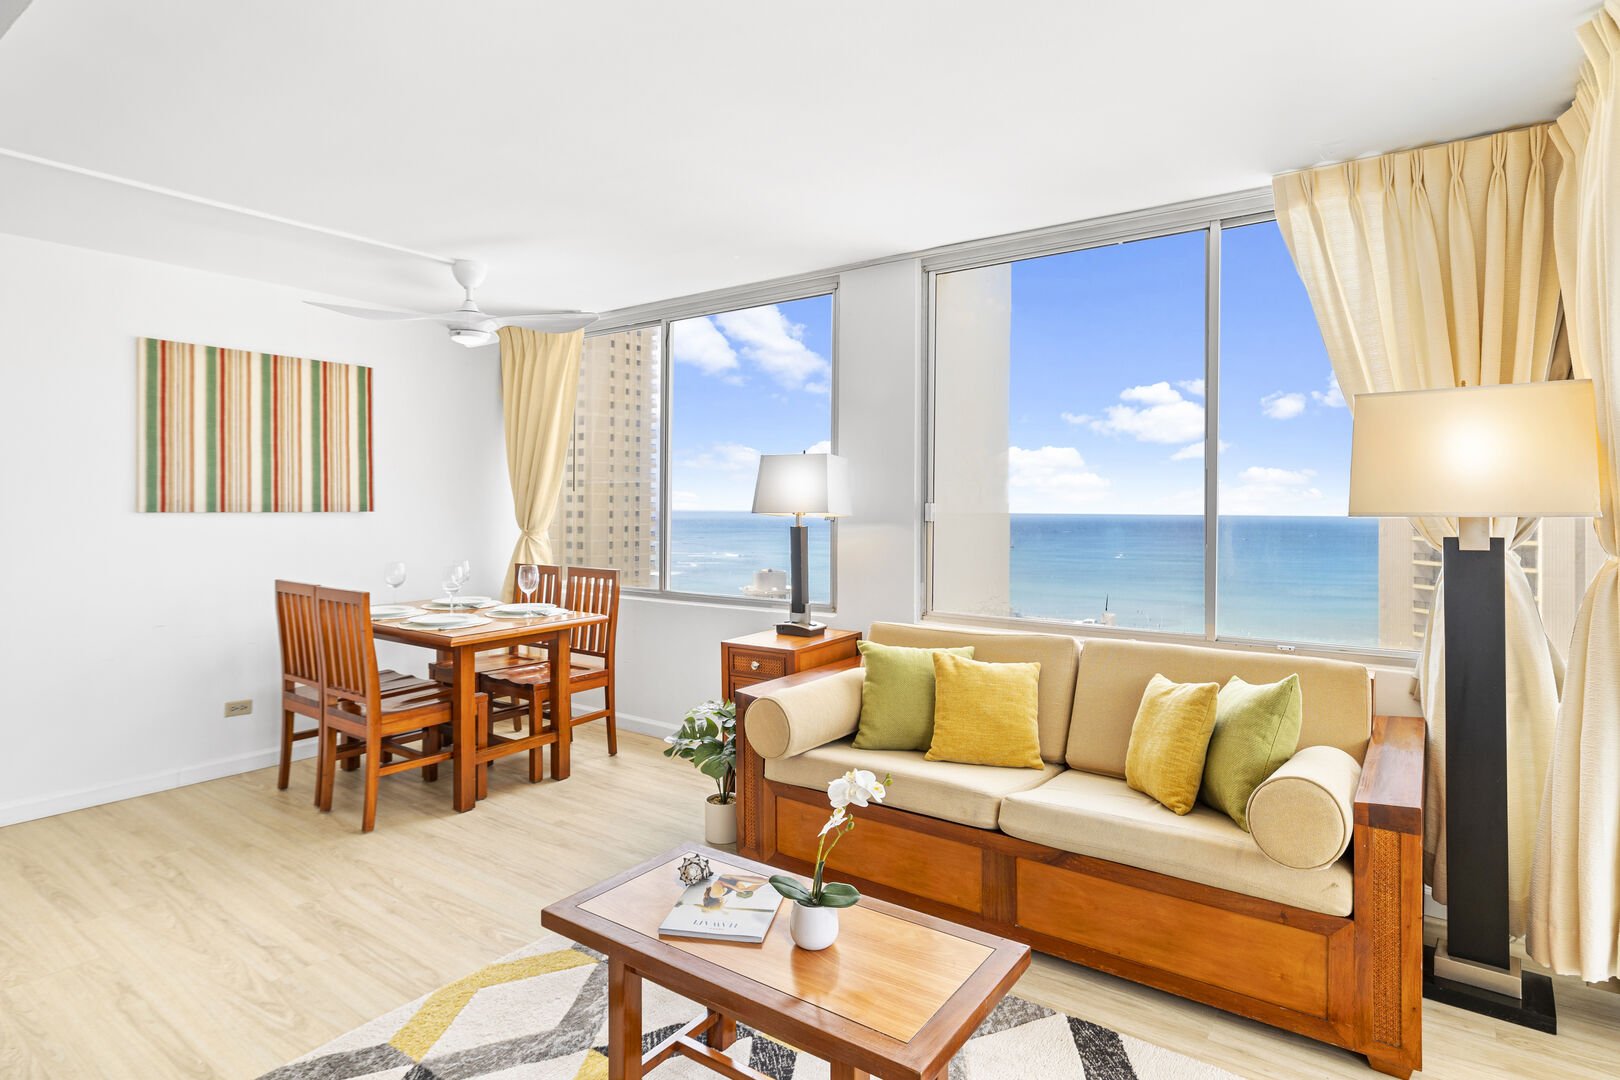 The living room features a pull-out sleeper sofa and dining area with 4 chairs! Enjoy the view of the ocean view!